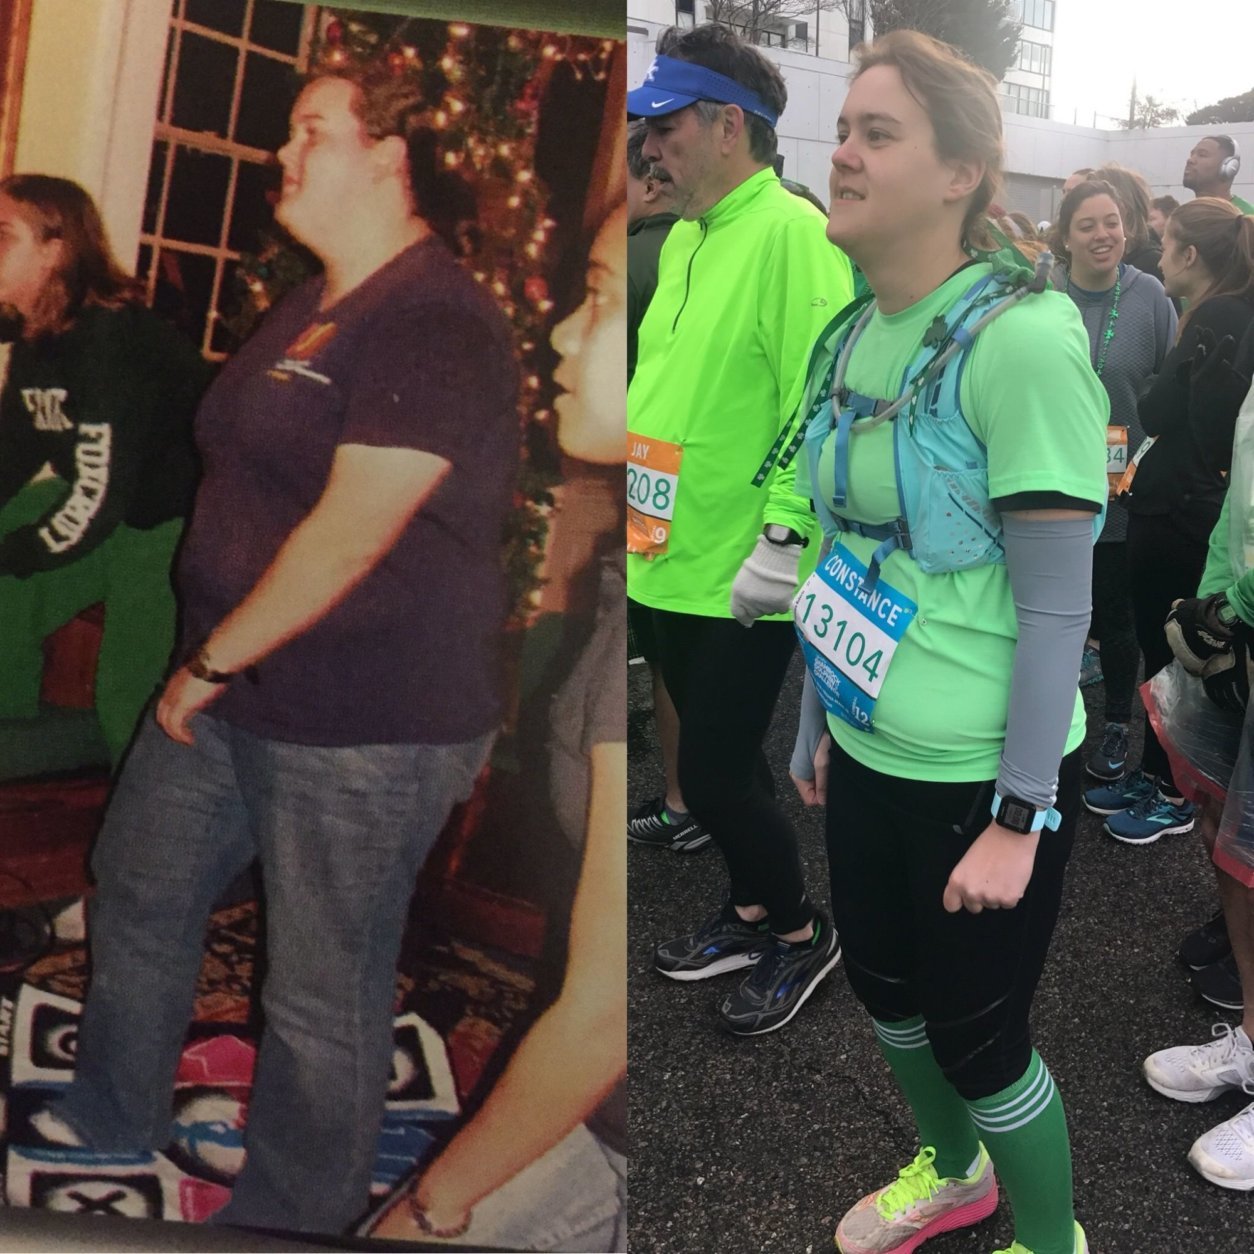 Candace Roberts has lost over 160 pounds and found a passion for running.  The Oct. 28 Marine Corps Marathon is not just a finish line to her, but one step on her journey of weight loss and running. (Courtesy Candace Roberts)